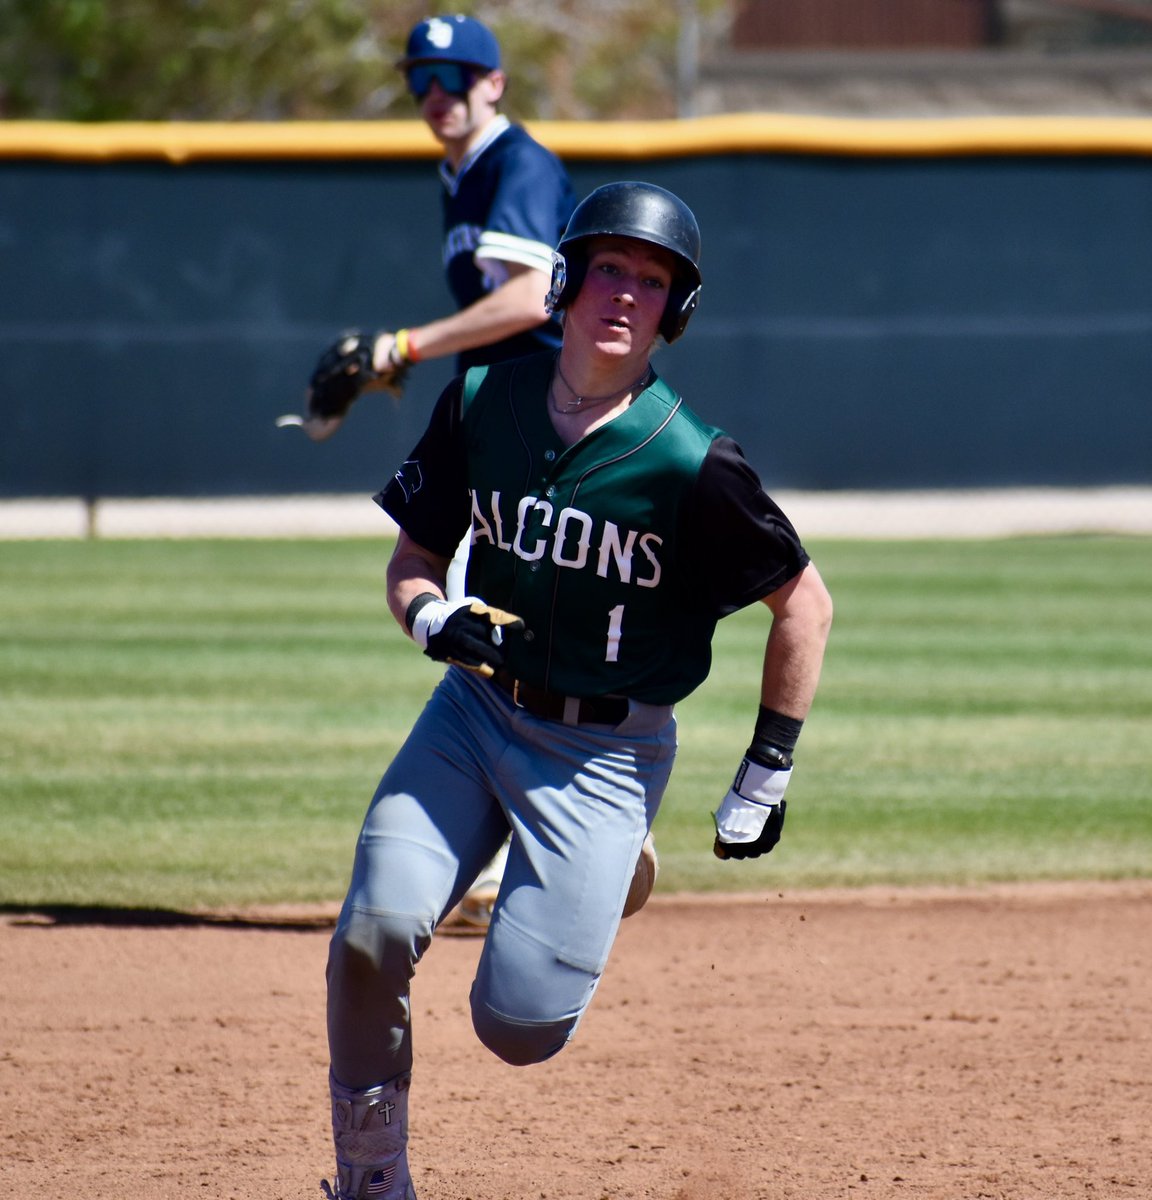 Staley picked up a conference win last night beating a tough Lee’s Summit team 7-1. Hampshire was outstanding on the mound (6INN,6H,0ER,1BB,5K) Offense was barreling balls last night, Phillippe(3-4), Wilson(2-4), Unruh(2-4,RBI),Maddox(2-4,RBI) and Paul(2-3). @SHSFalcons